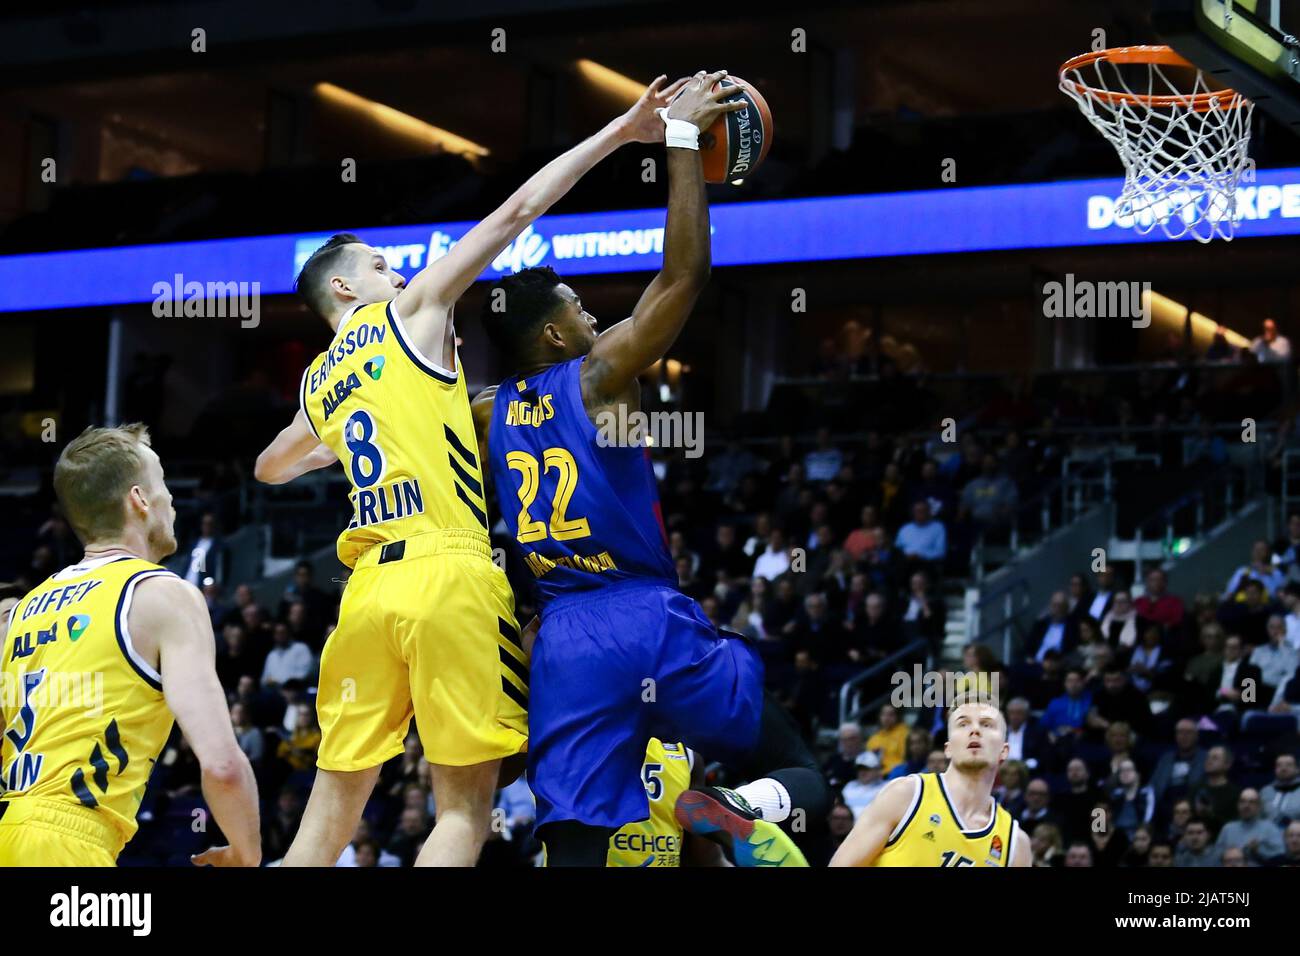 Berlin, Germany, March 04, 2020:Basketball player Cory Higgins of FC Barcelona score a point during the EuroLeague basketball match Stock Photo